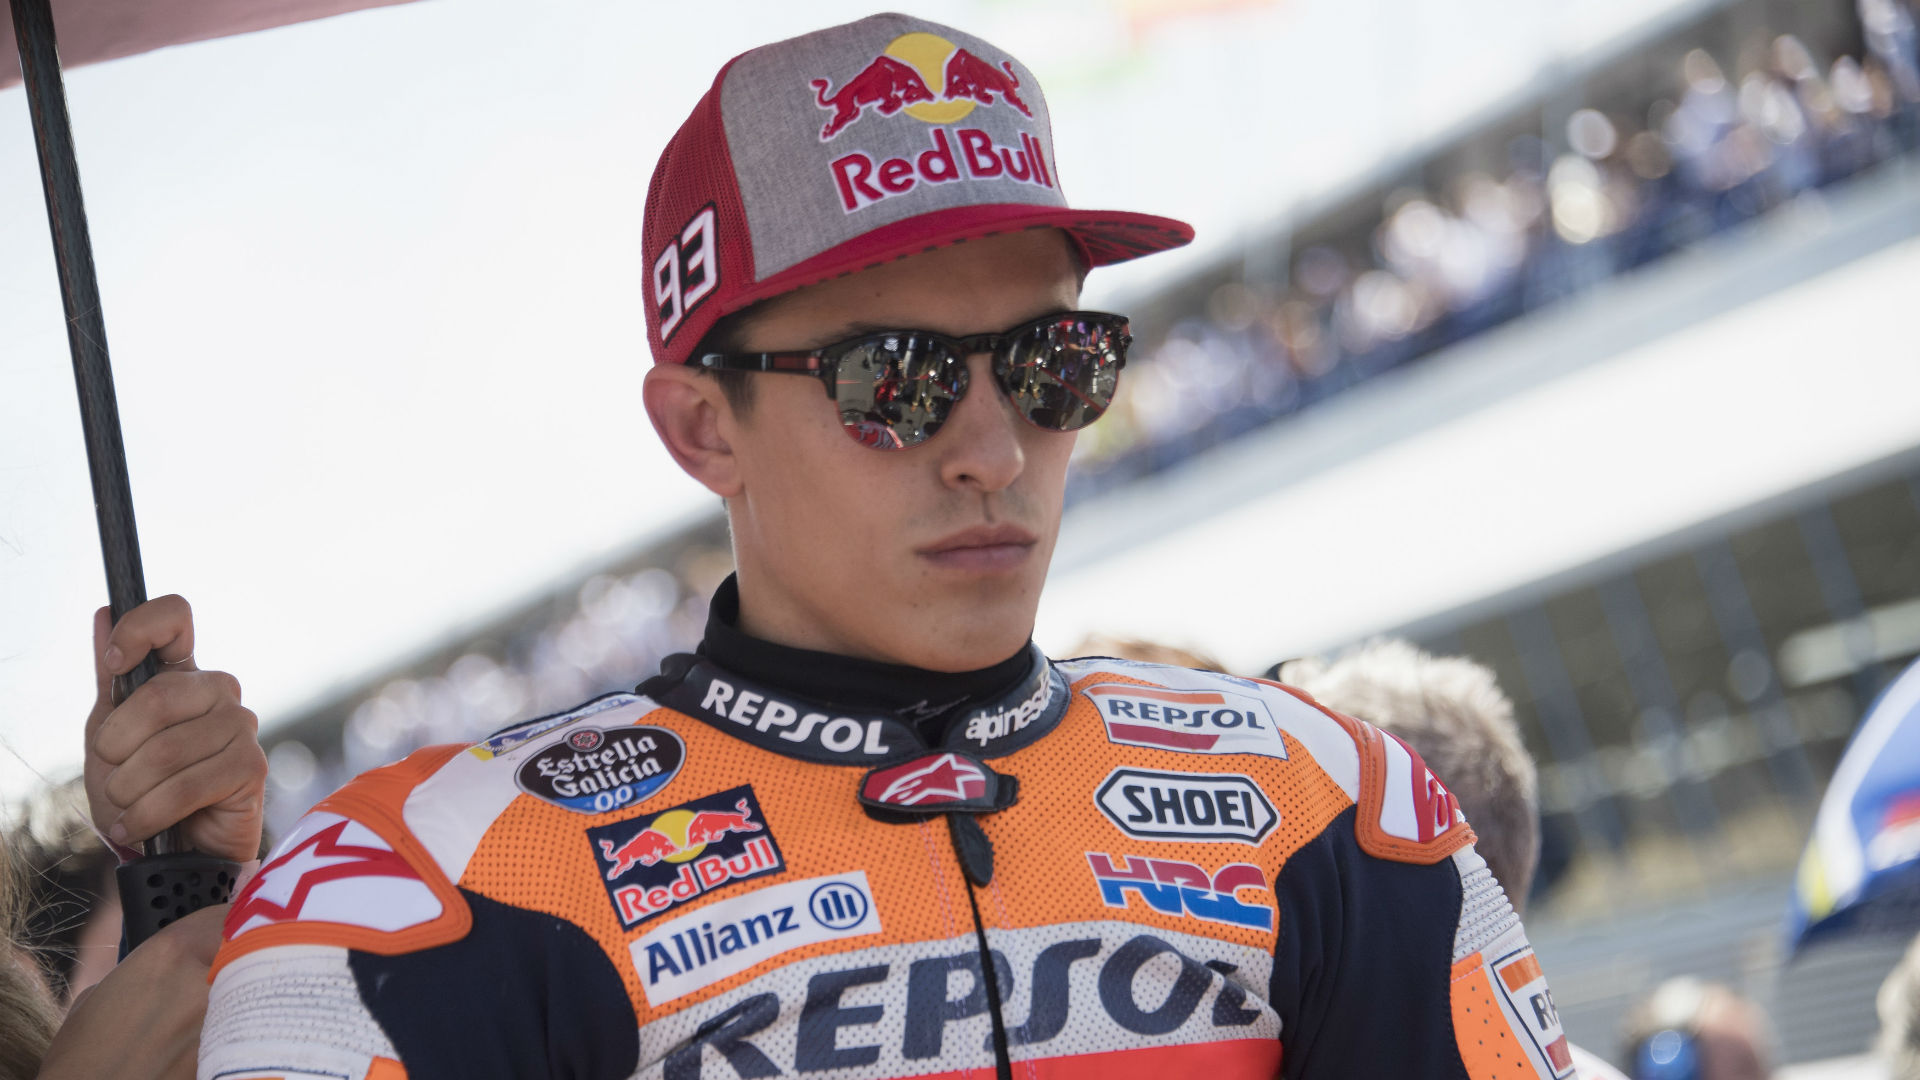 A comfortable win in Jerez was not enough to satisfy Marc Marquez as he looks to capitalise on his MotoGP lead.